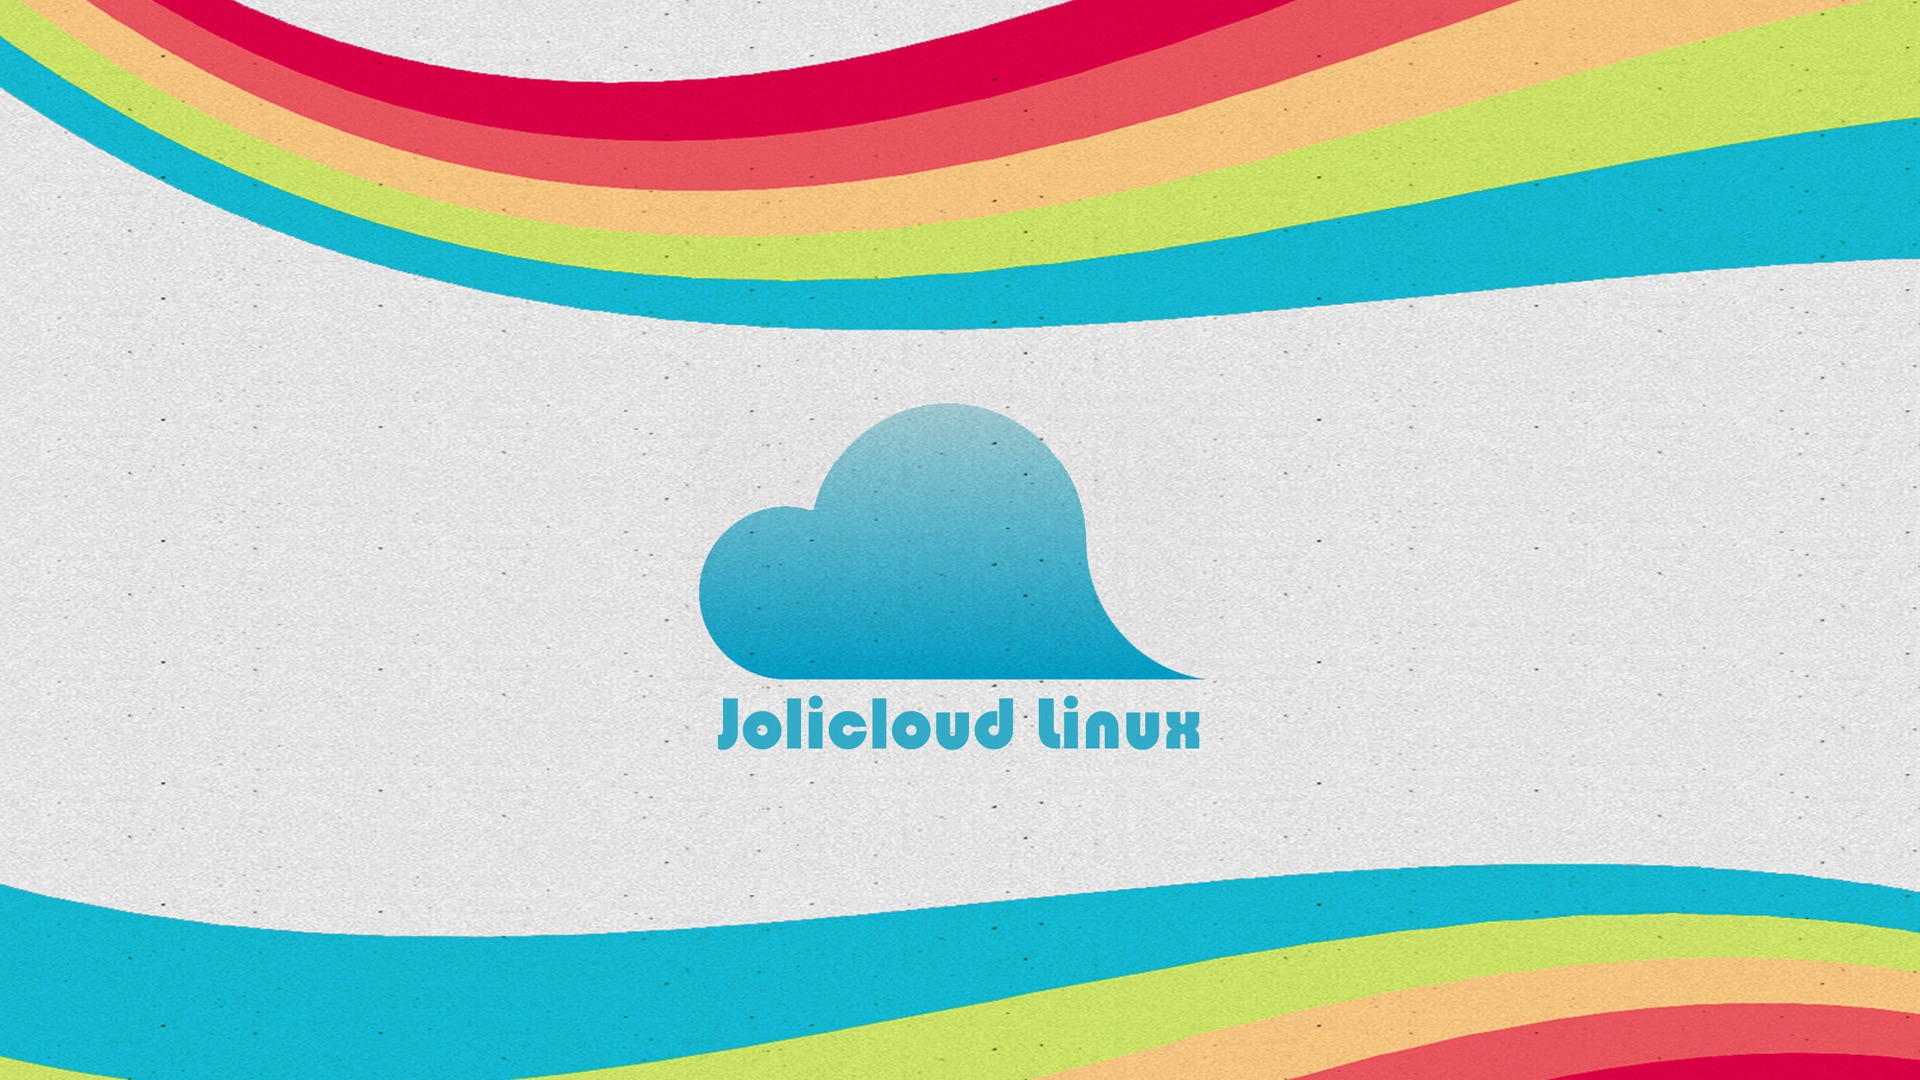 Jolicloud Linux for 1920 x 1080 HDTV 1080p resolution